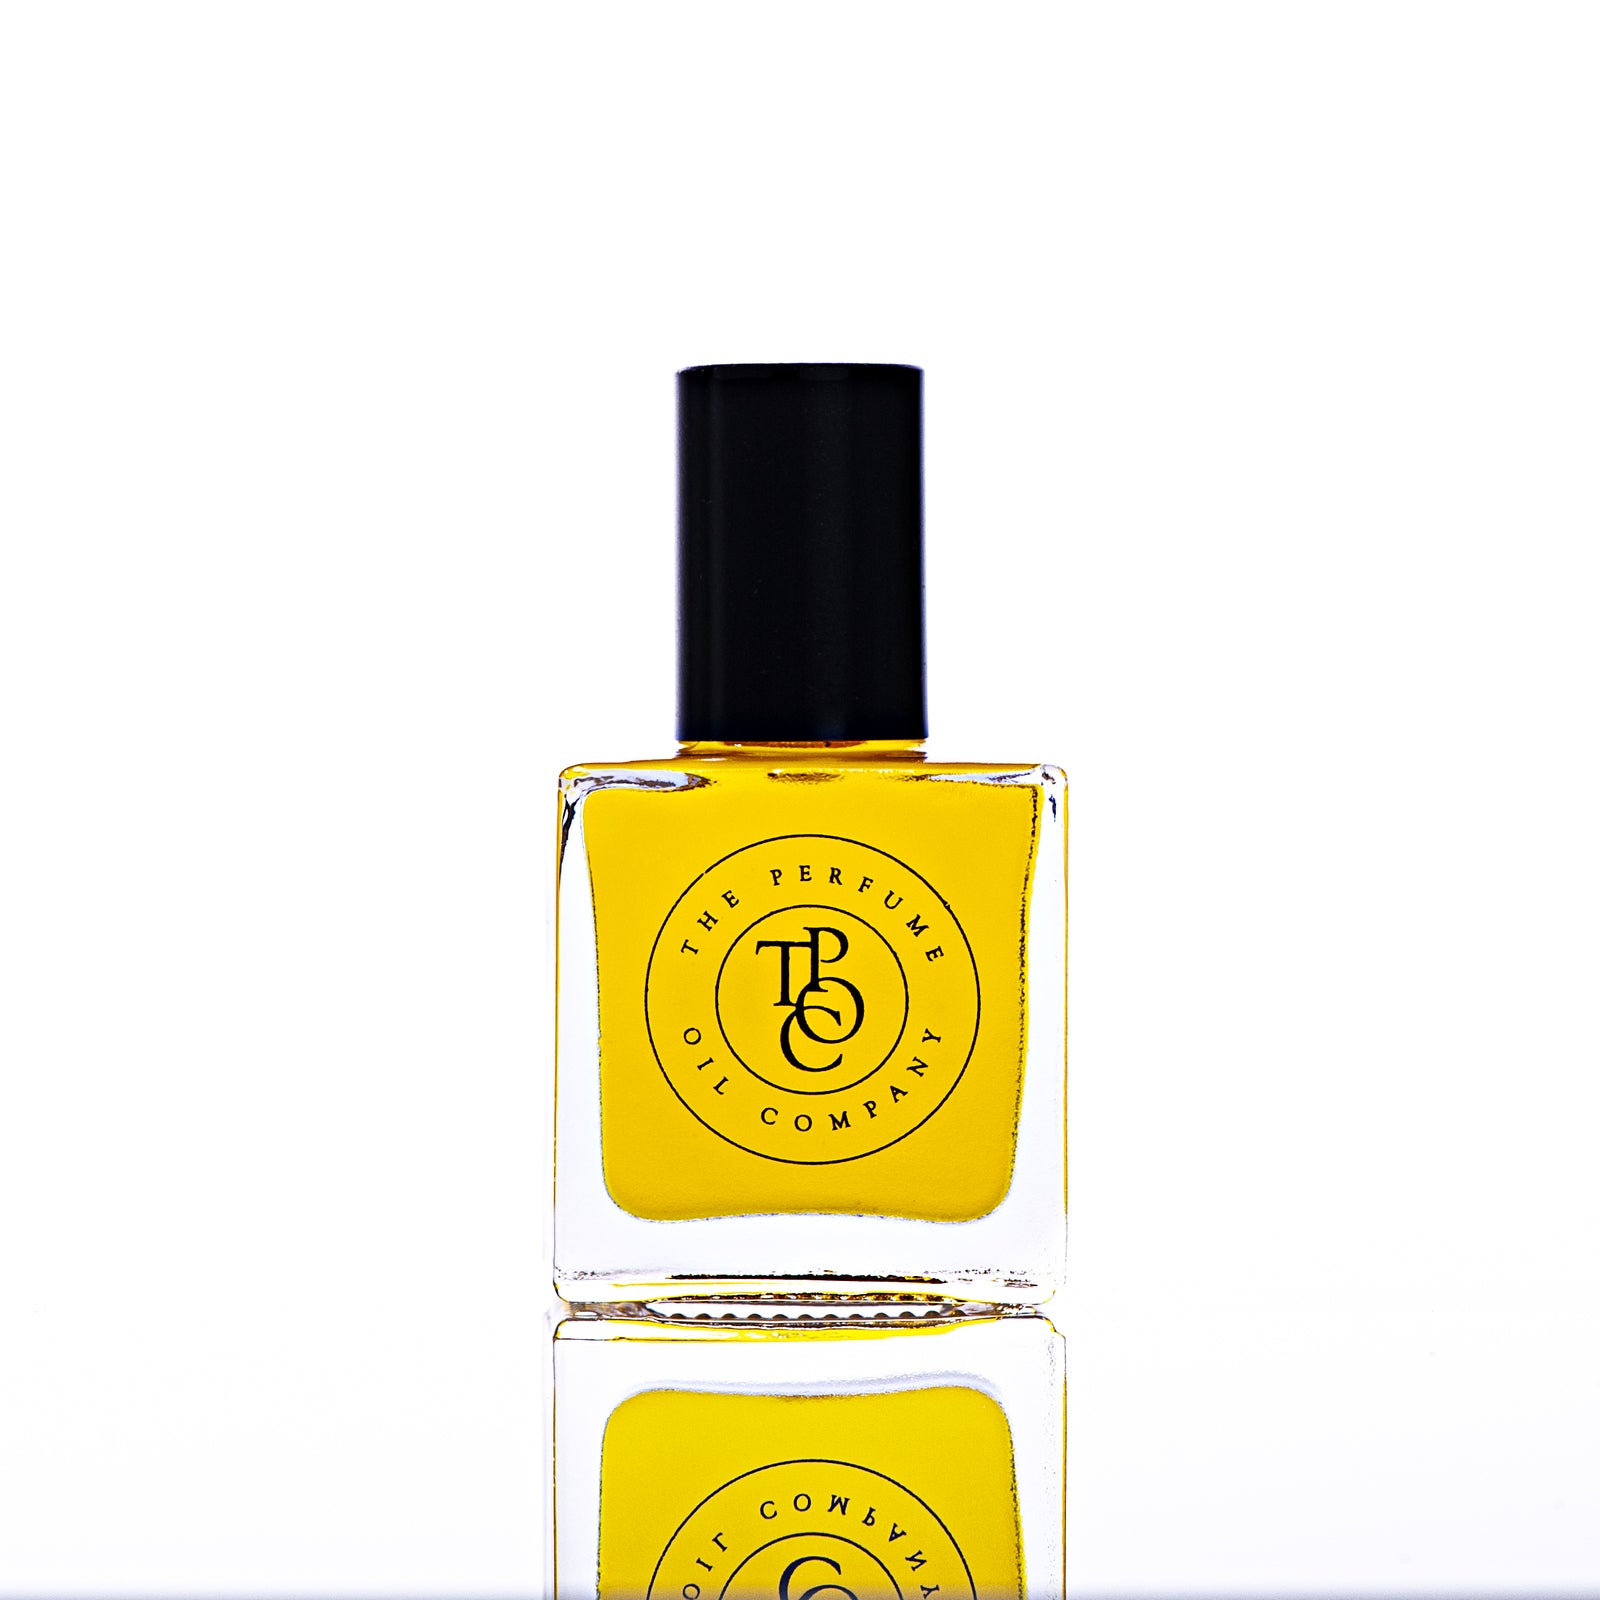 The Perfume Oil Company - Amber Musk & Myrth